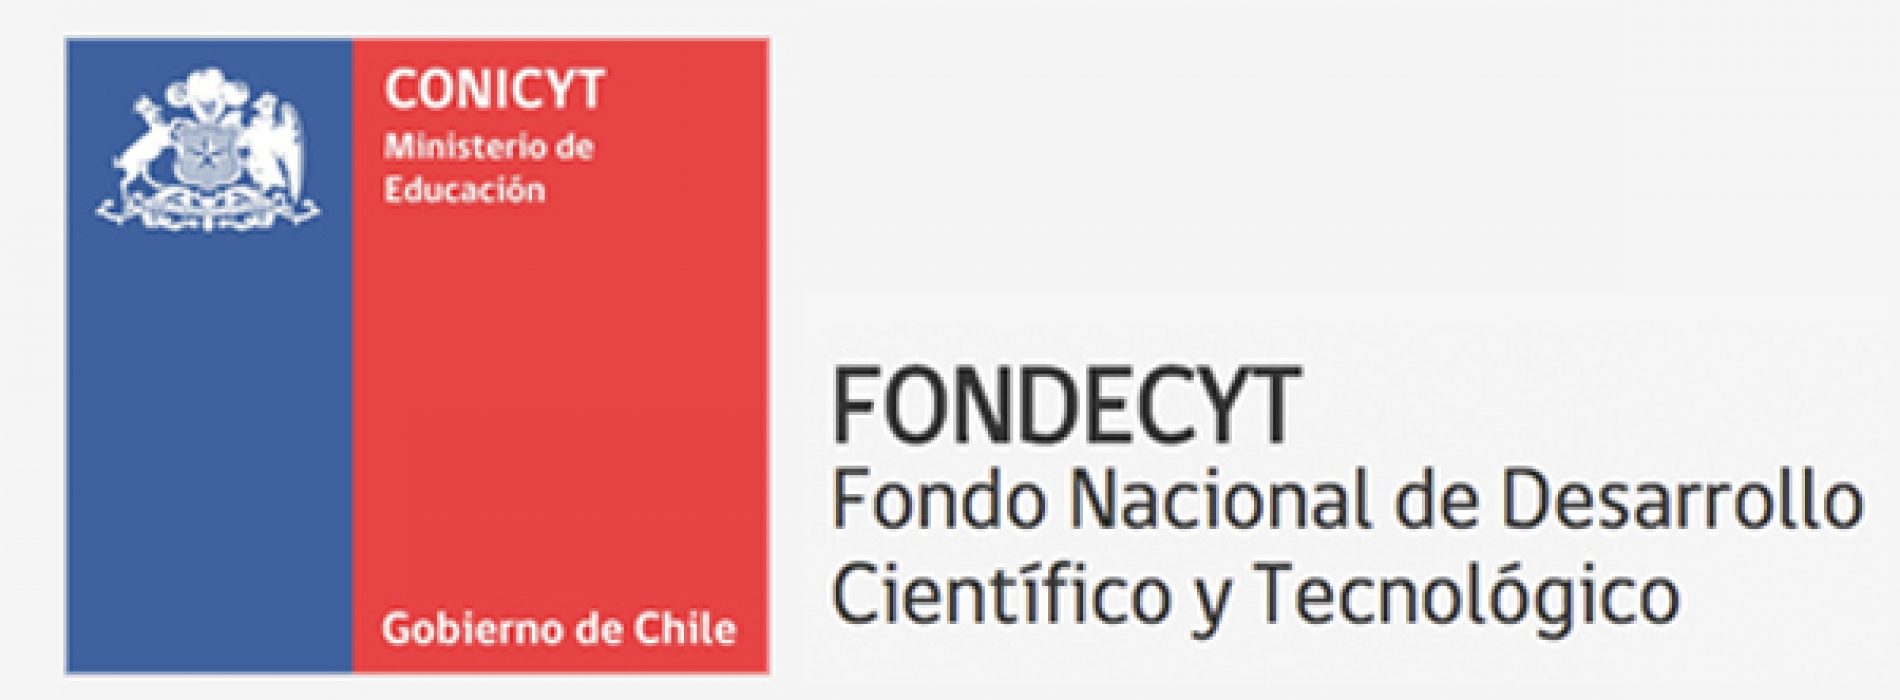 DOCTOR MARTIN MONTECINO IS ELECTED NEW PRESIDENT OF THE CONSEJO SUPERIOR DE FONDECYT SCIENCE